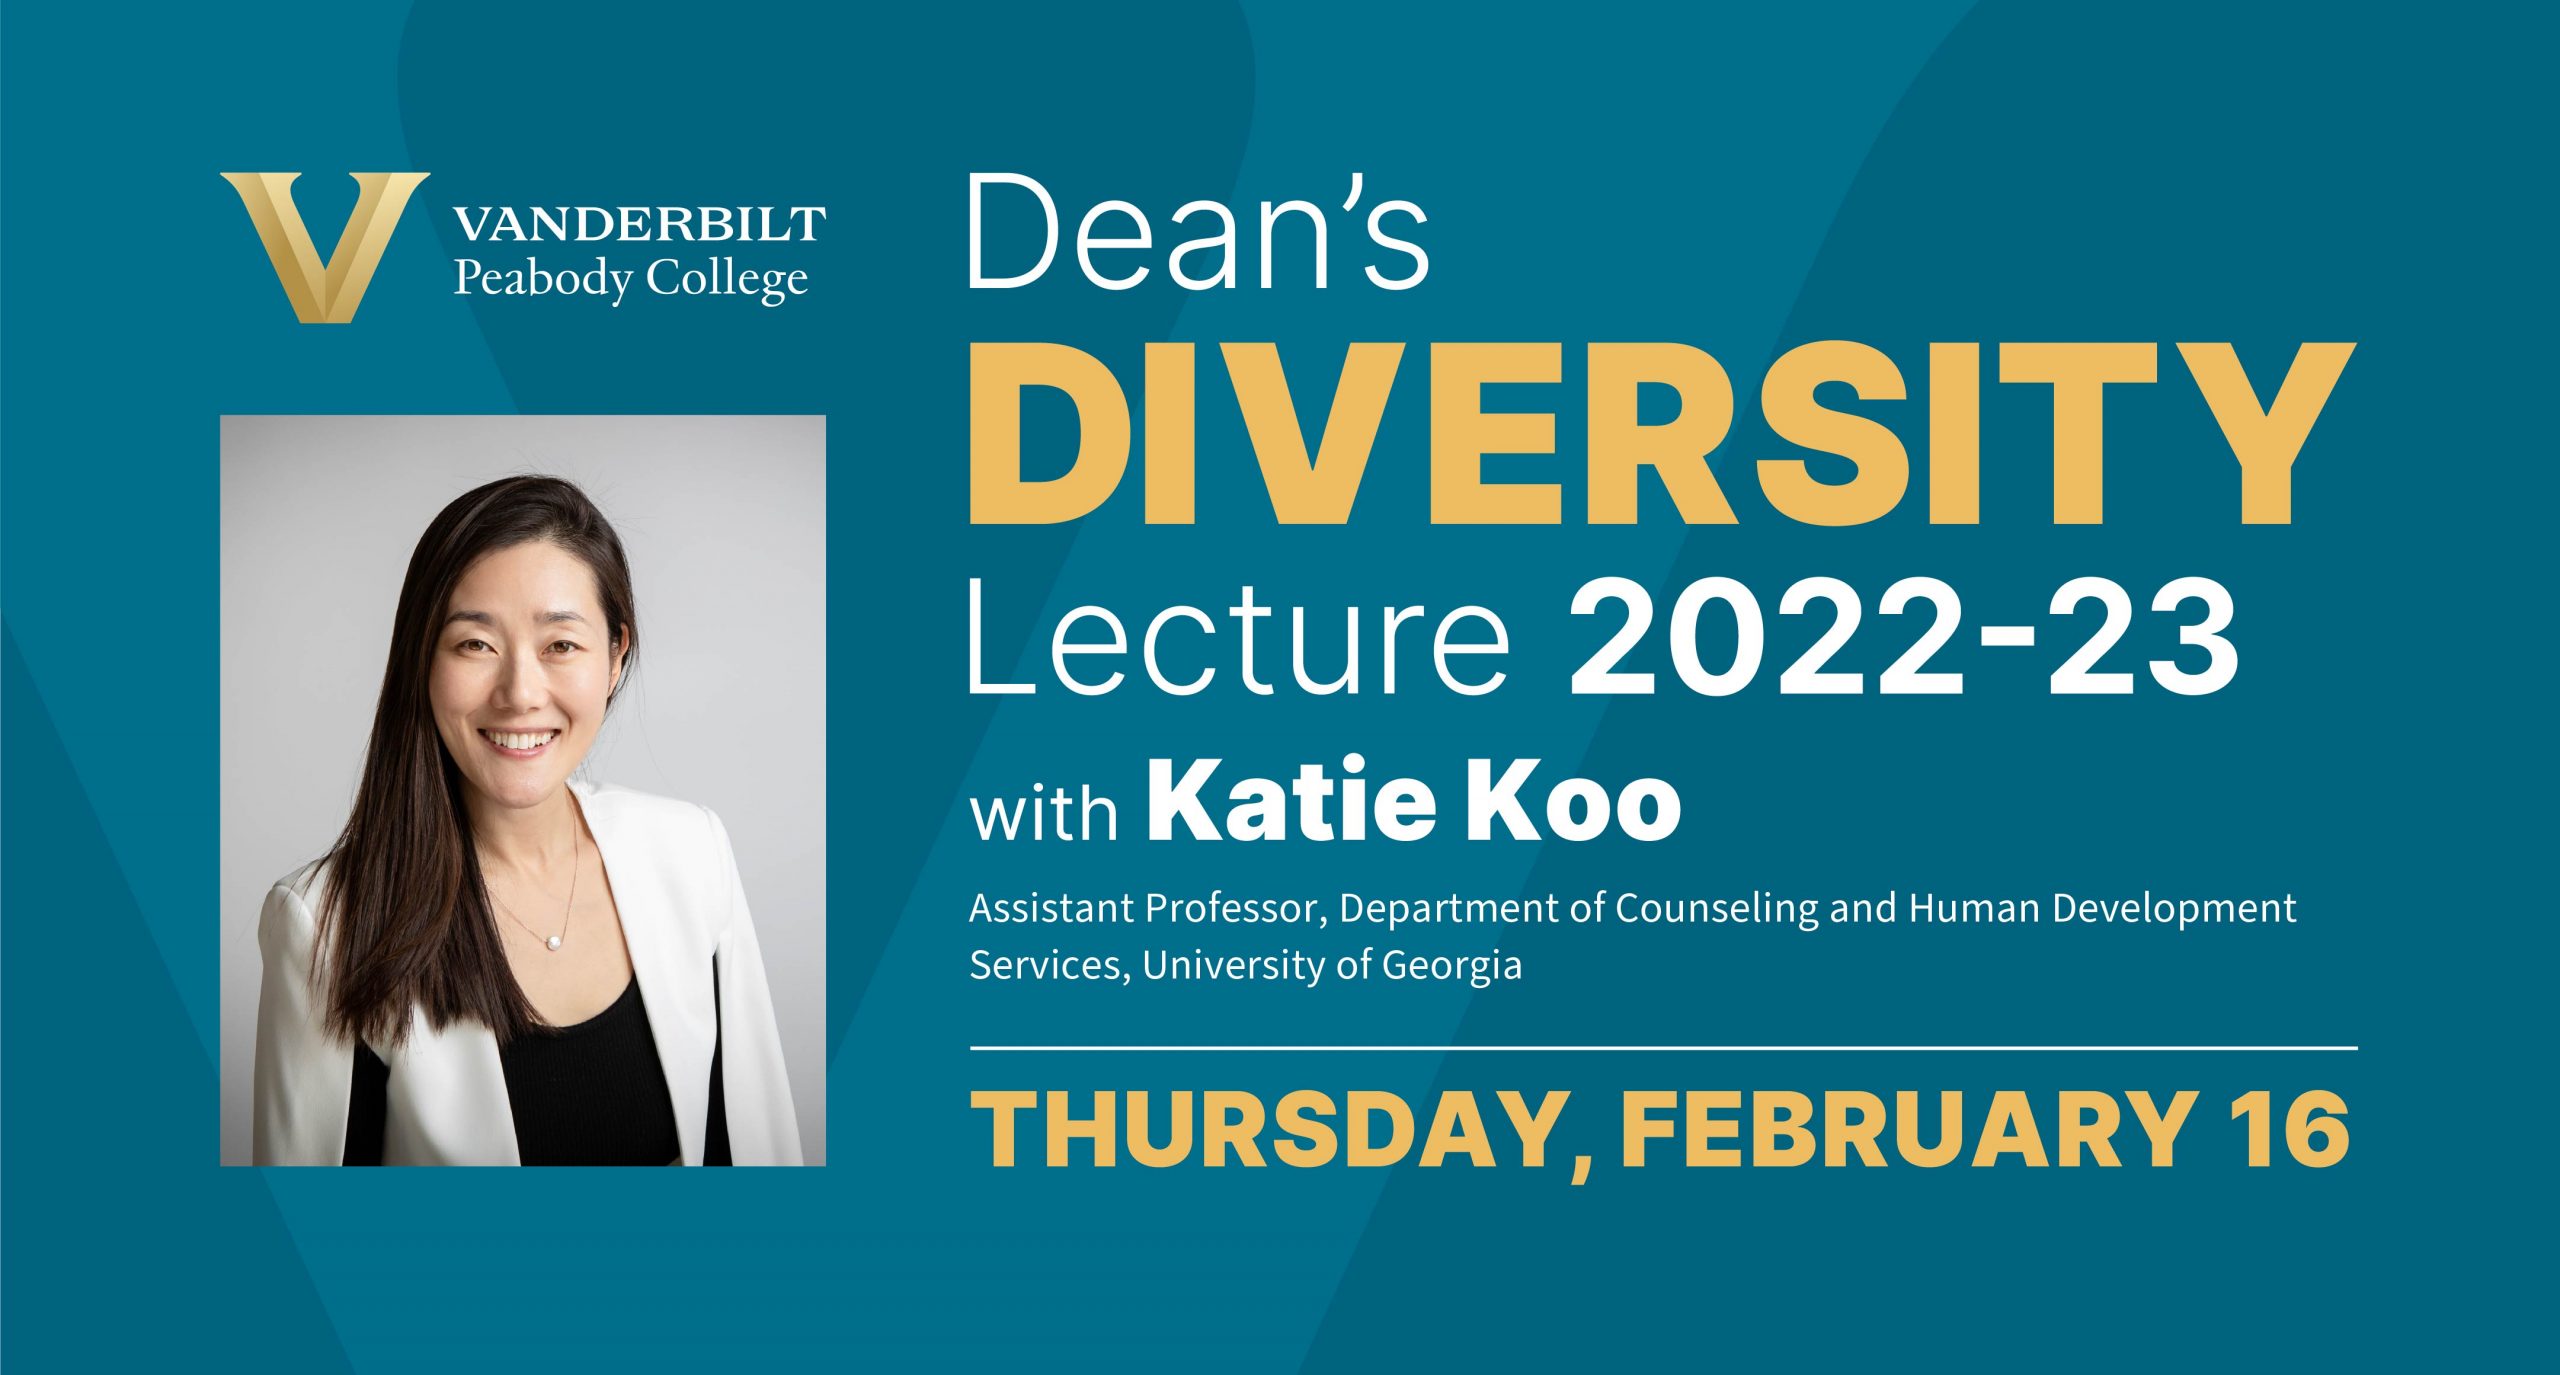 Promotional graphic for February 16 Dean's Diversity Lecture